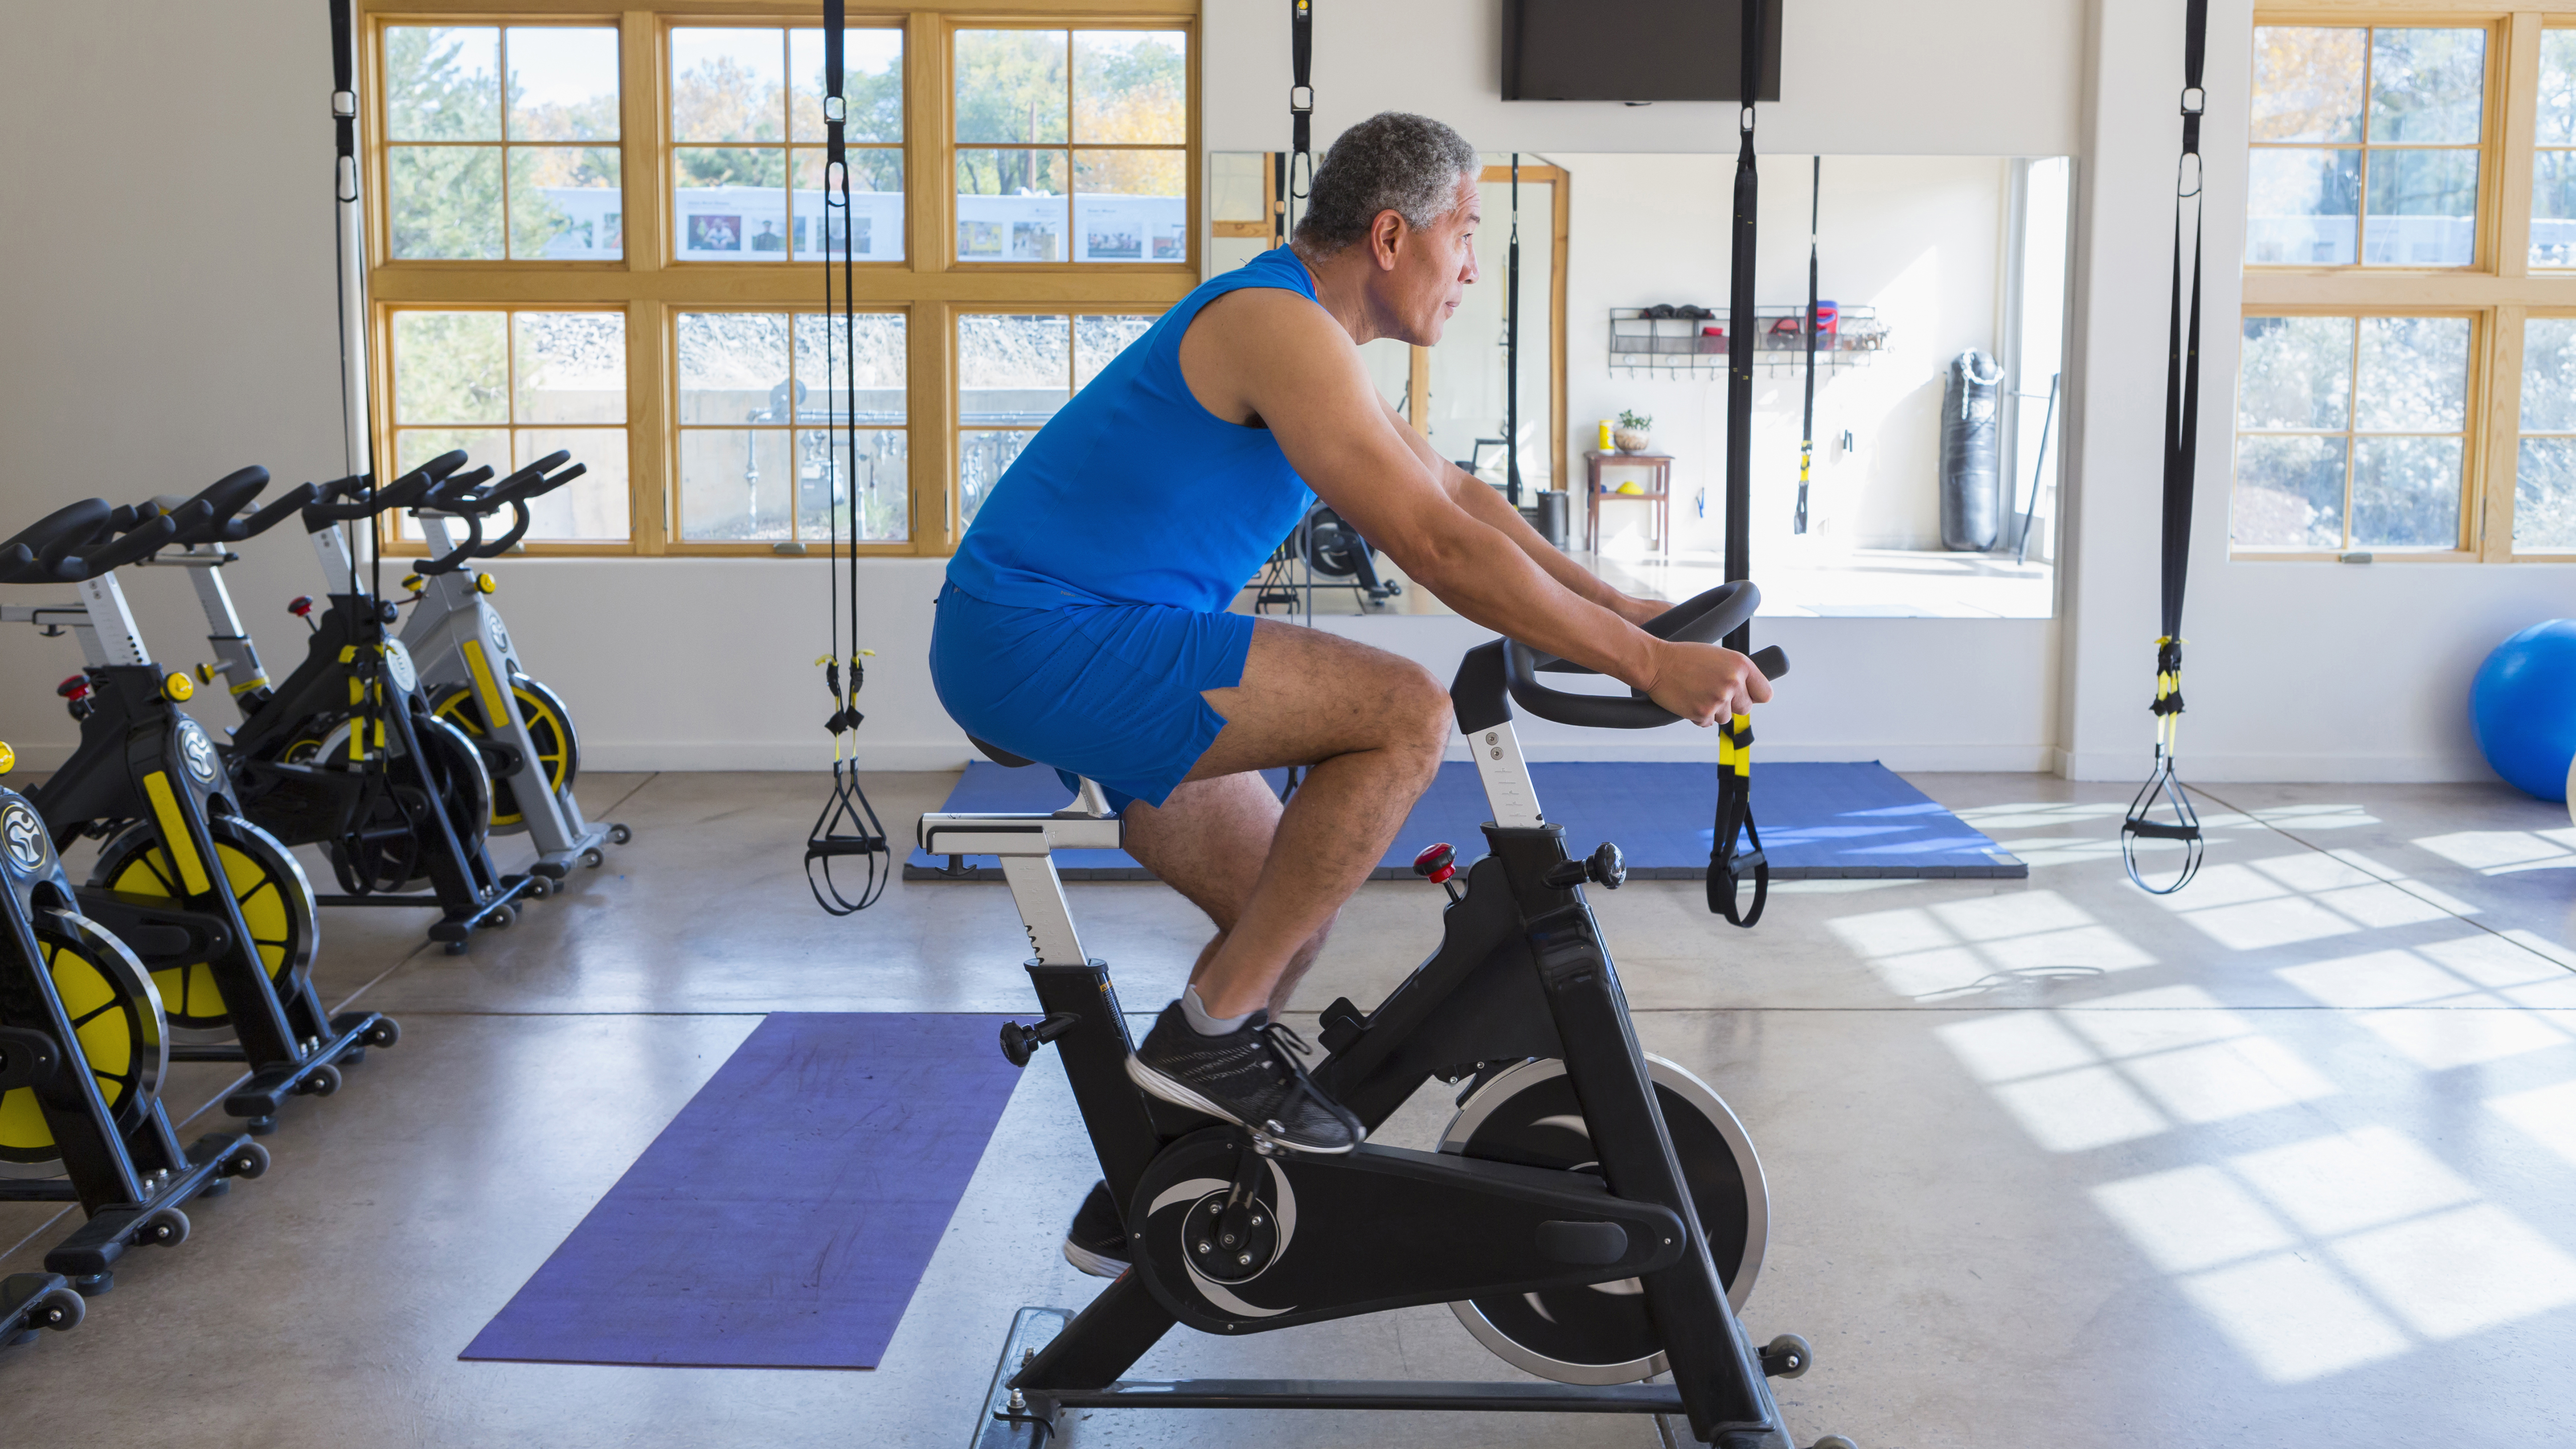 The man works out on a stationary bike in the gym